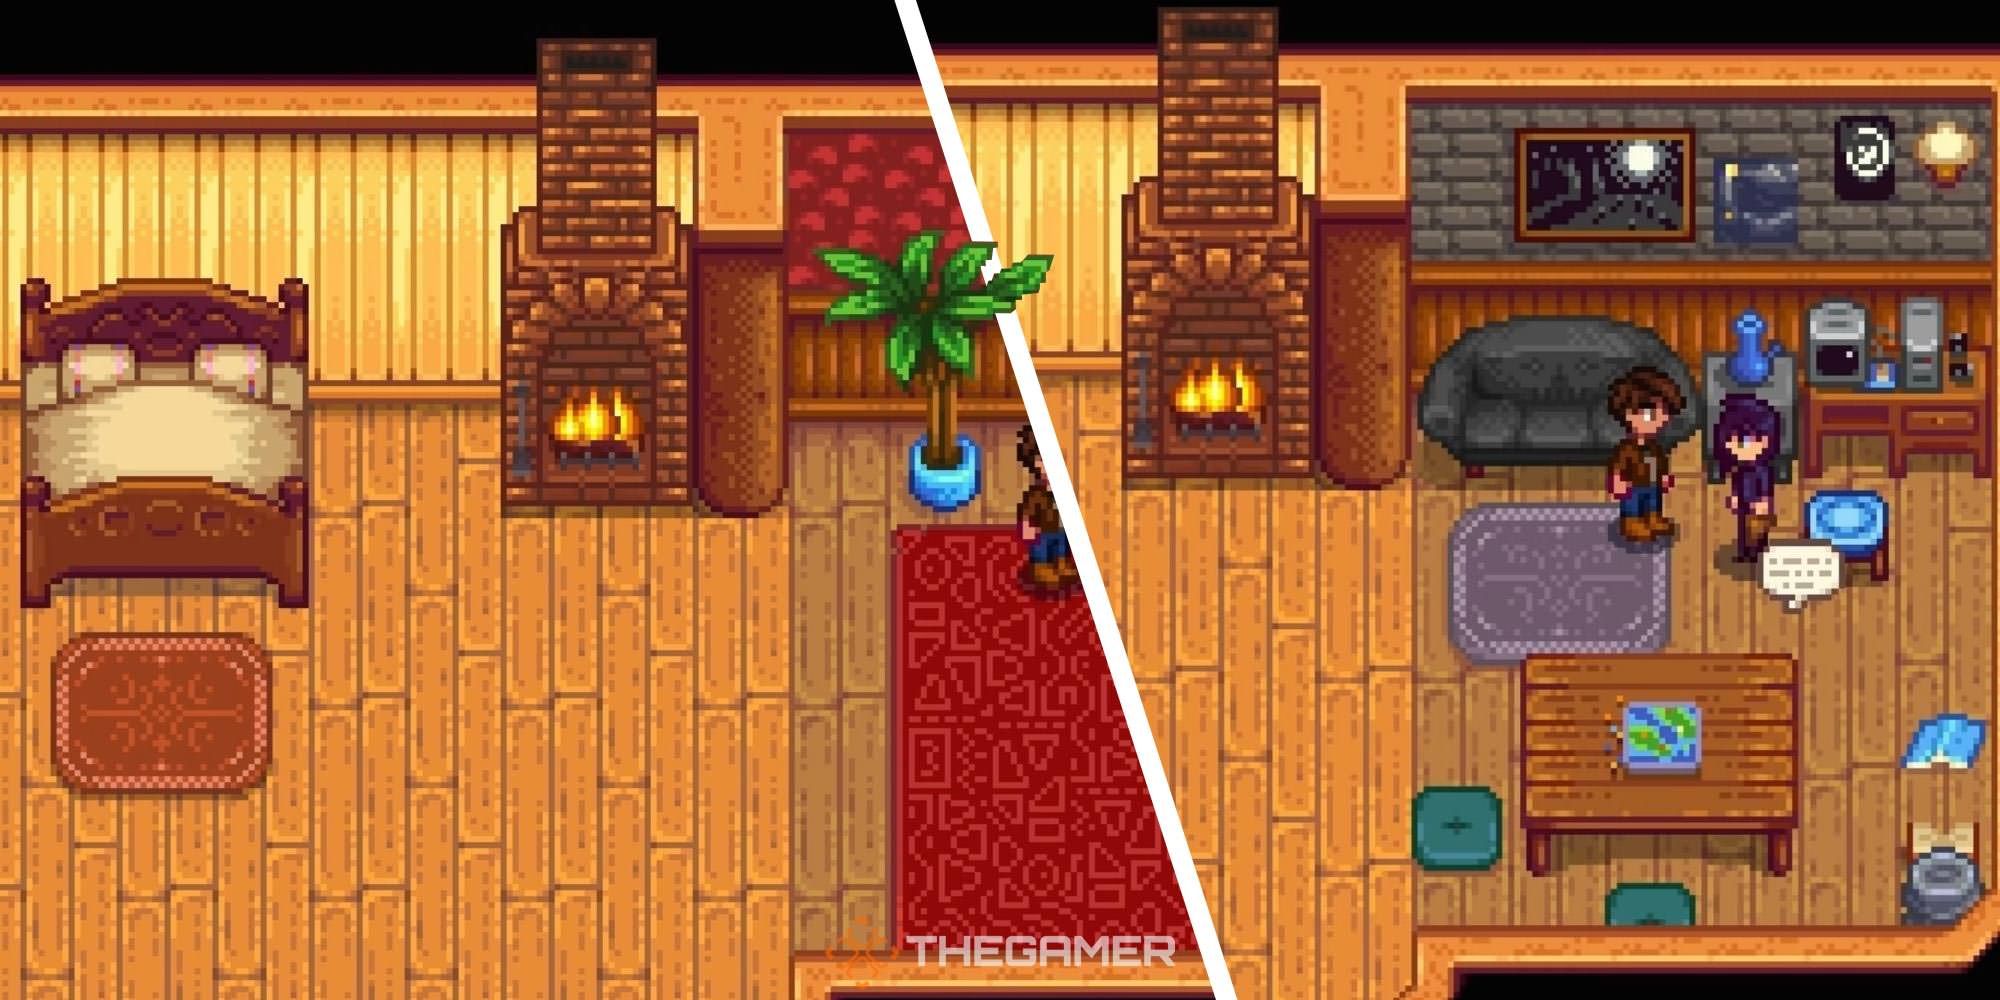 Stardew Valley: Every Spouse's Unique Room, Worst To Best